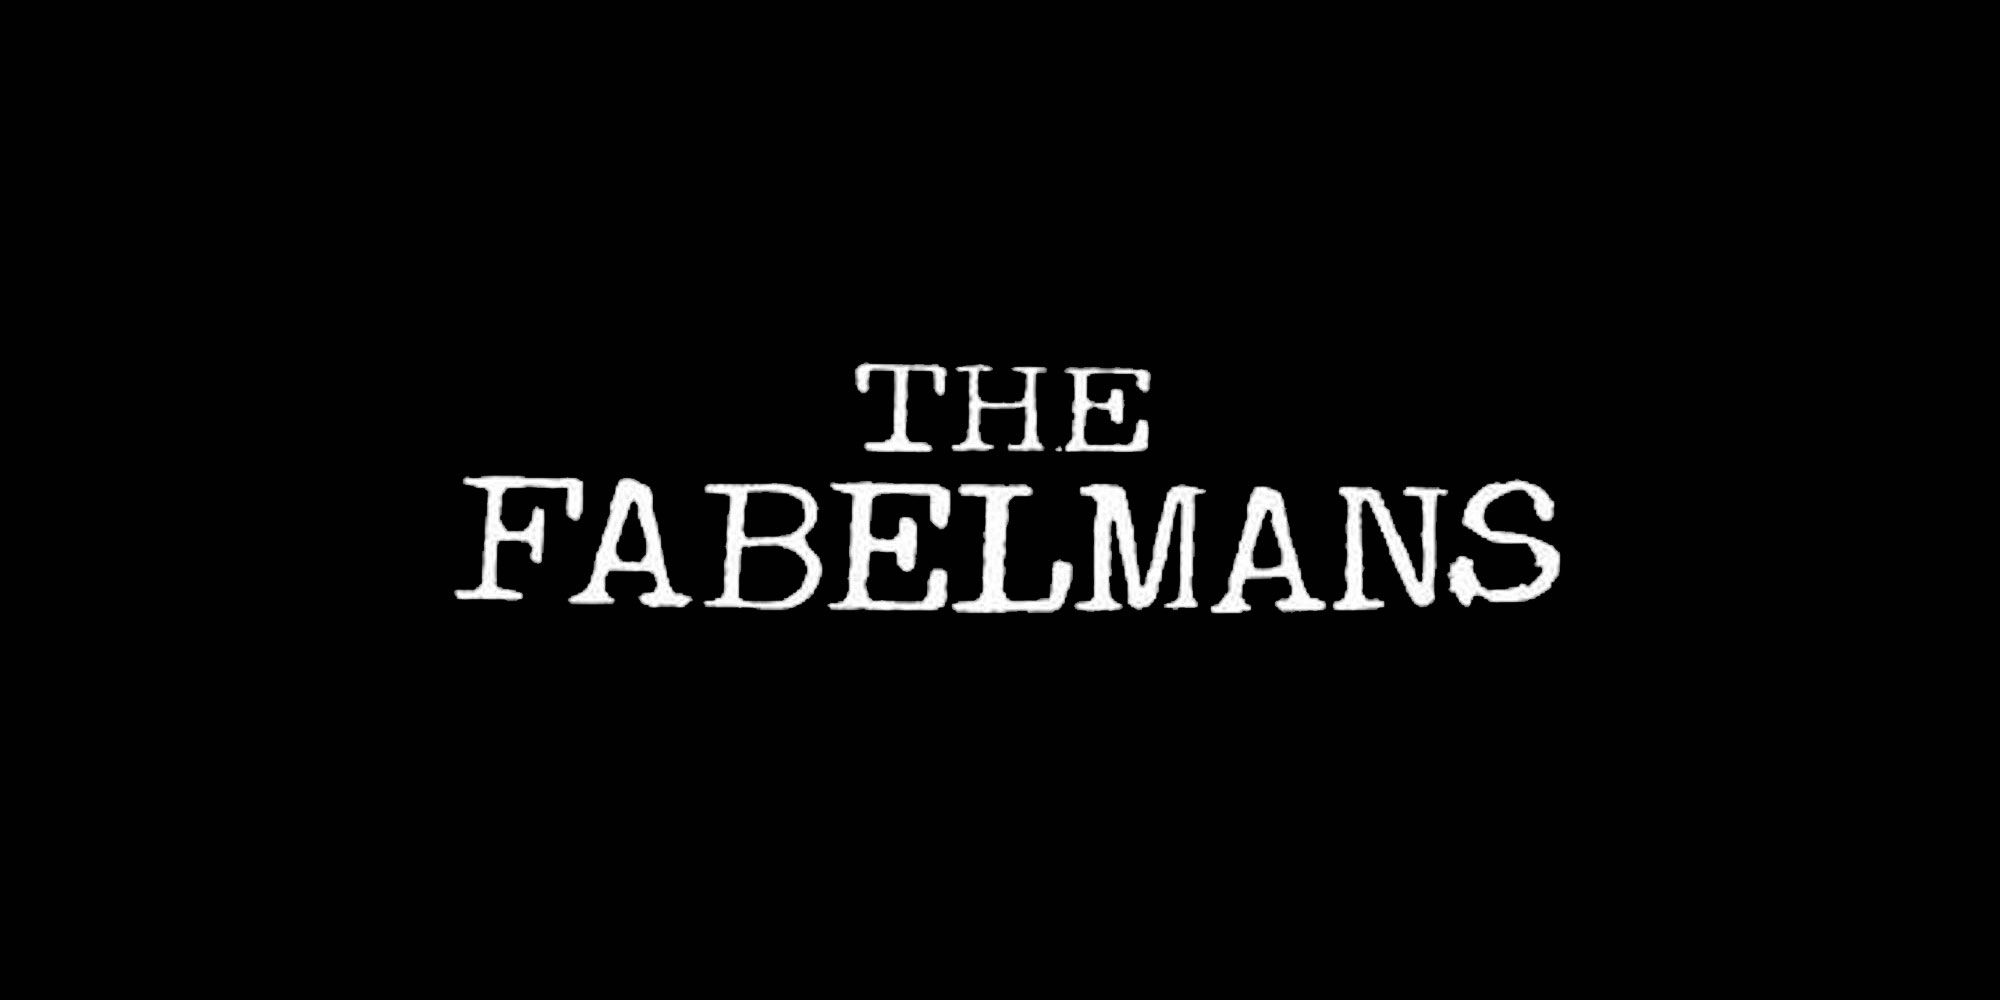 The Fablemen